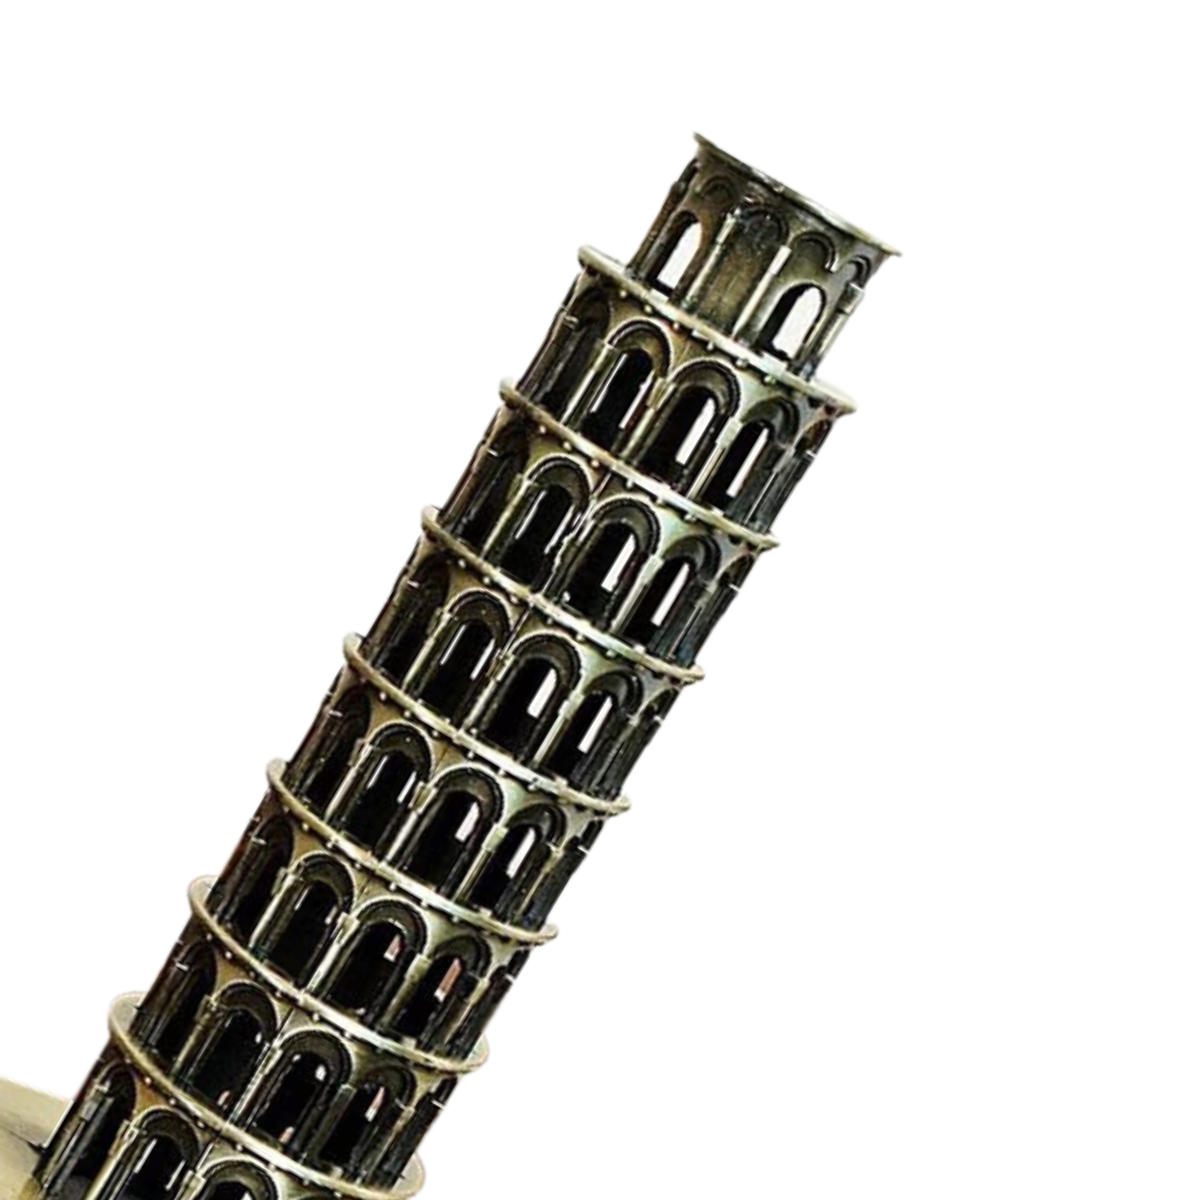 Finish Leaning Tower of Pisa 20cm Souvenir Metal Miniature Statue for Office and Home - Maya Bazaar